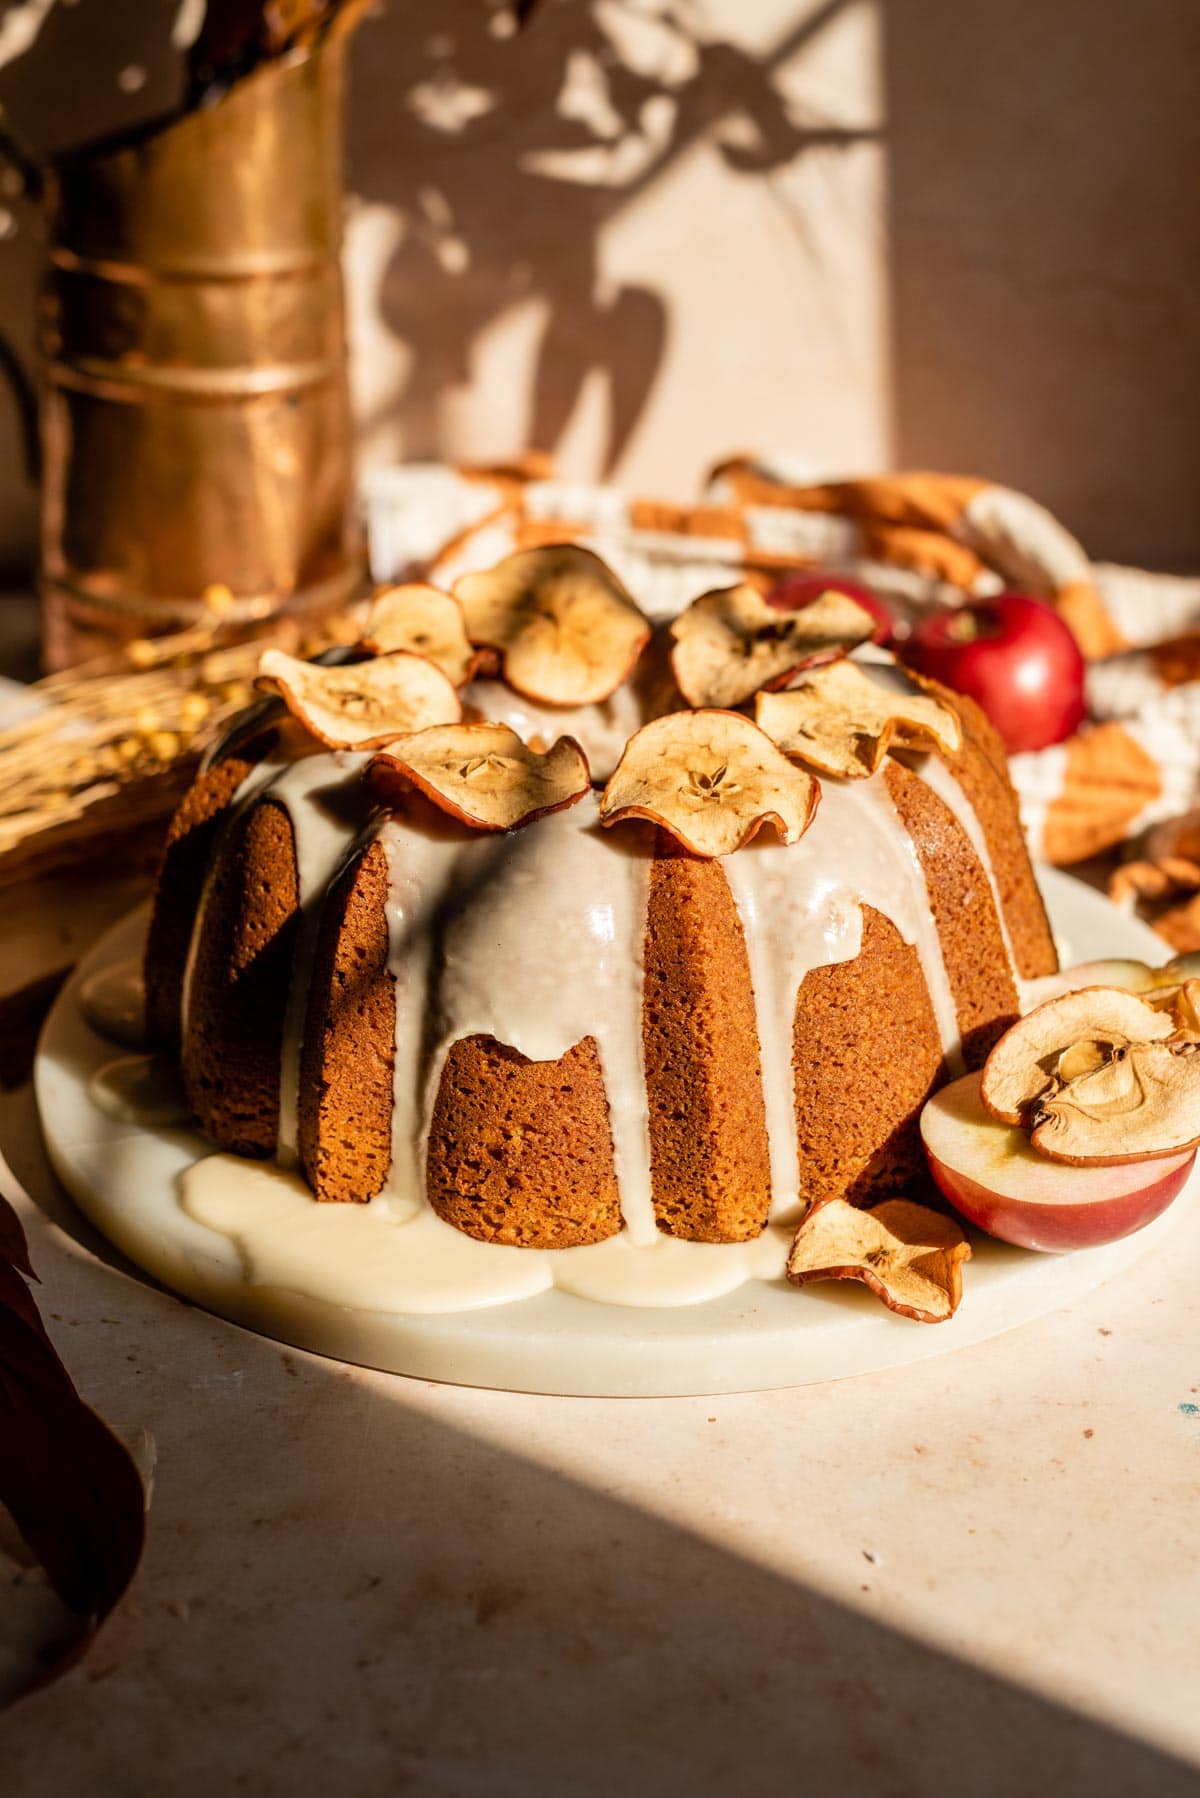 Apple Butter Pound cake on a marble slab with an apple glaze. Its then topped with dried apple slices and is on a brown stone background.